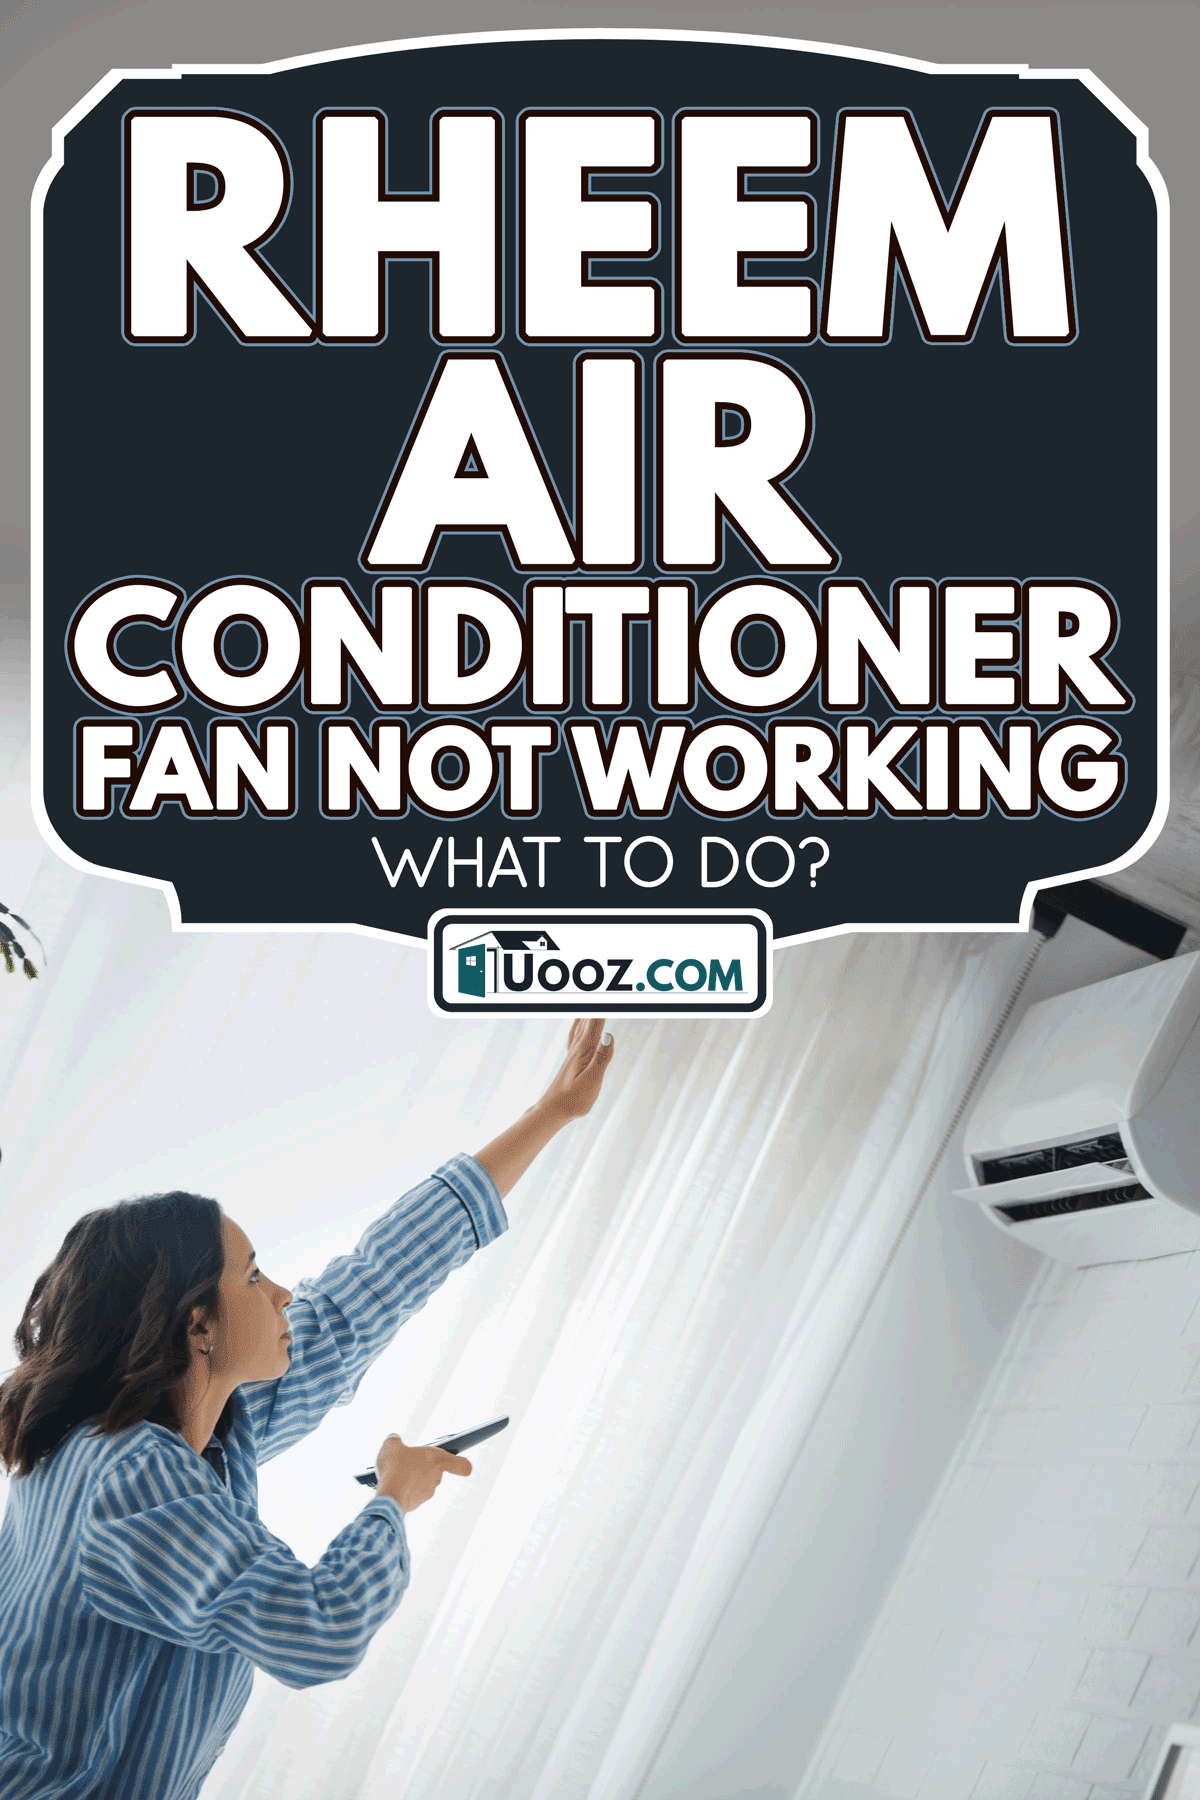 Woman is checking to see if the fan of the air conditioner is working, Rheem Air Conditioner Fan Not Working - What To Do?